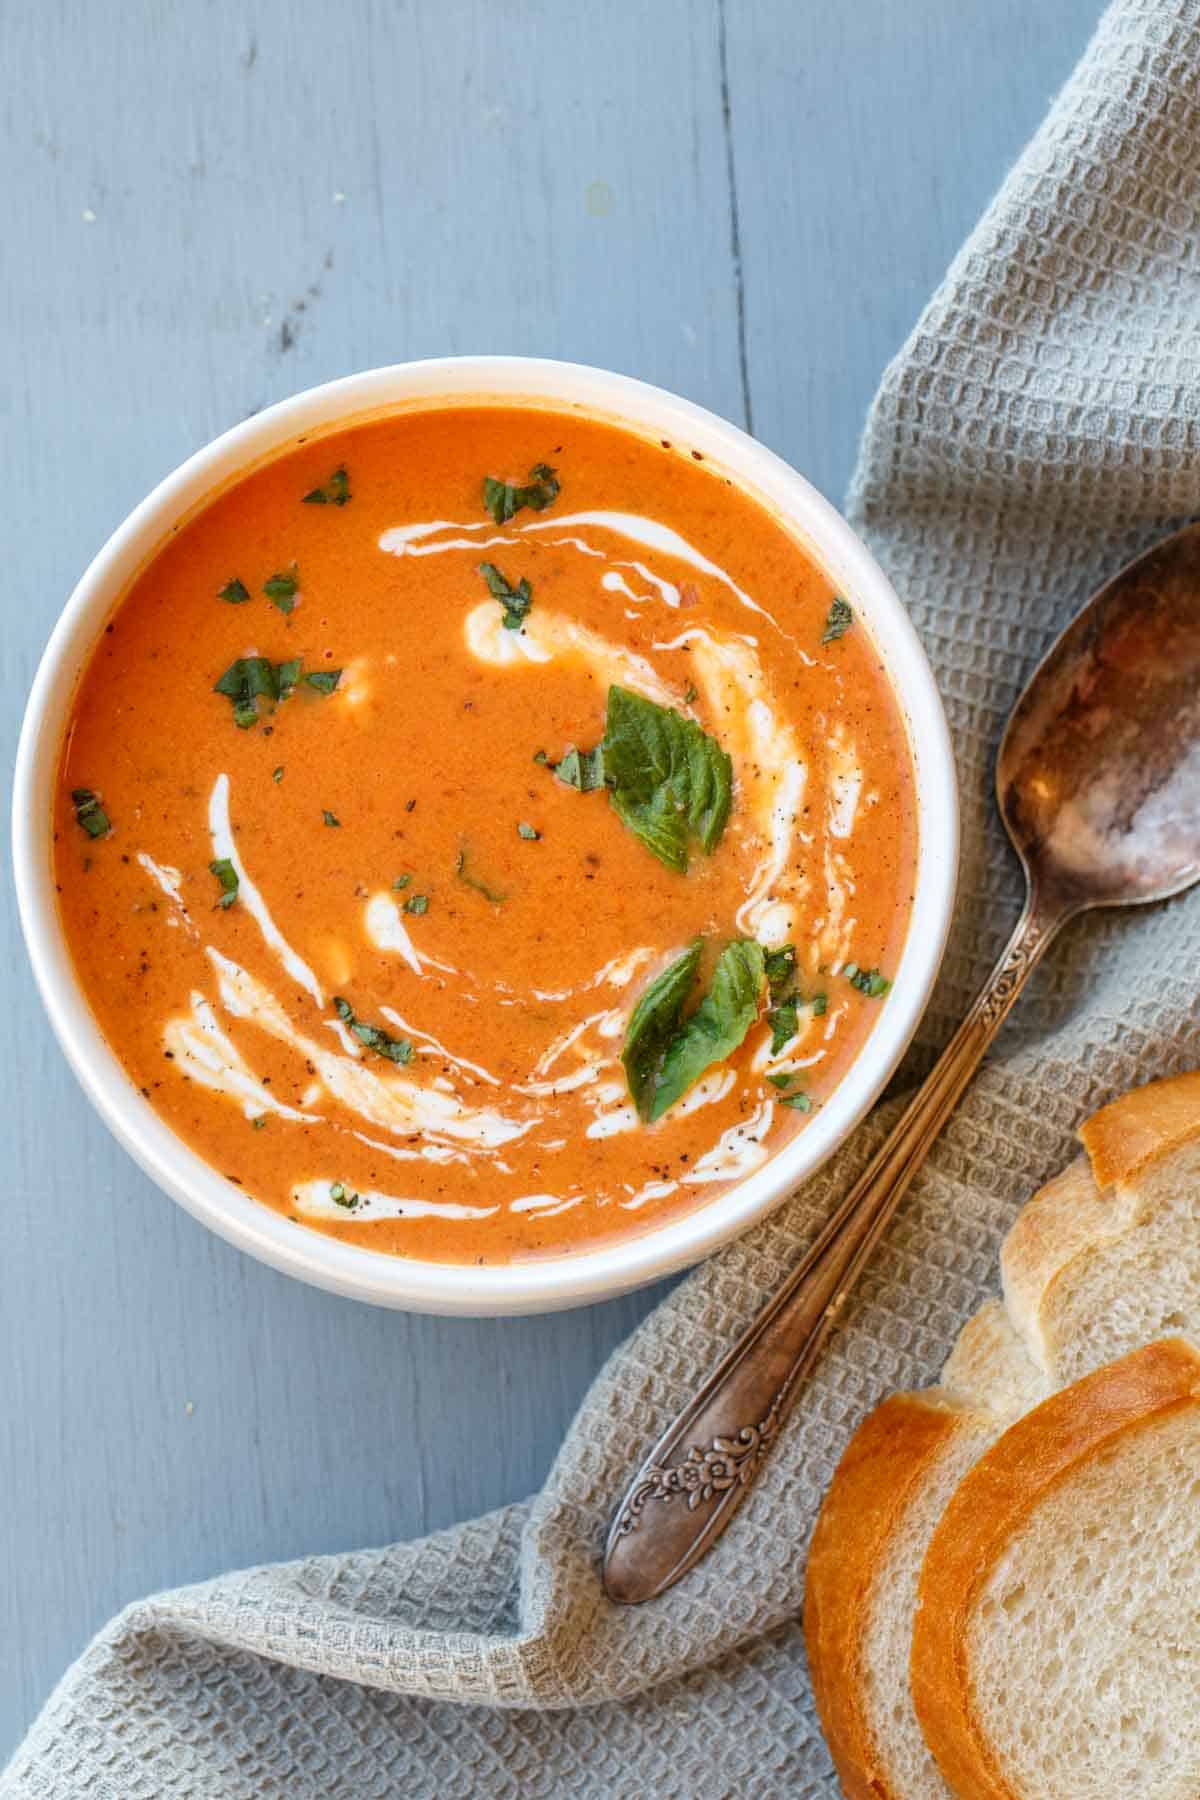 Tomato basil soup with a serving napkin.